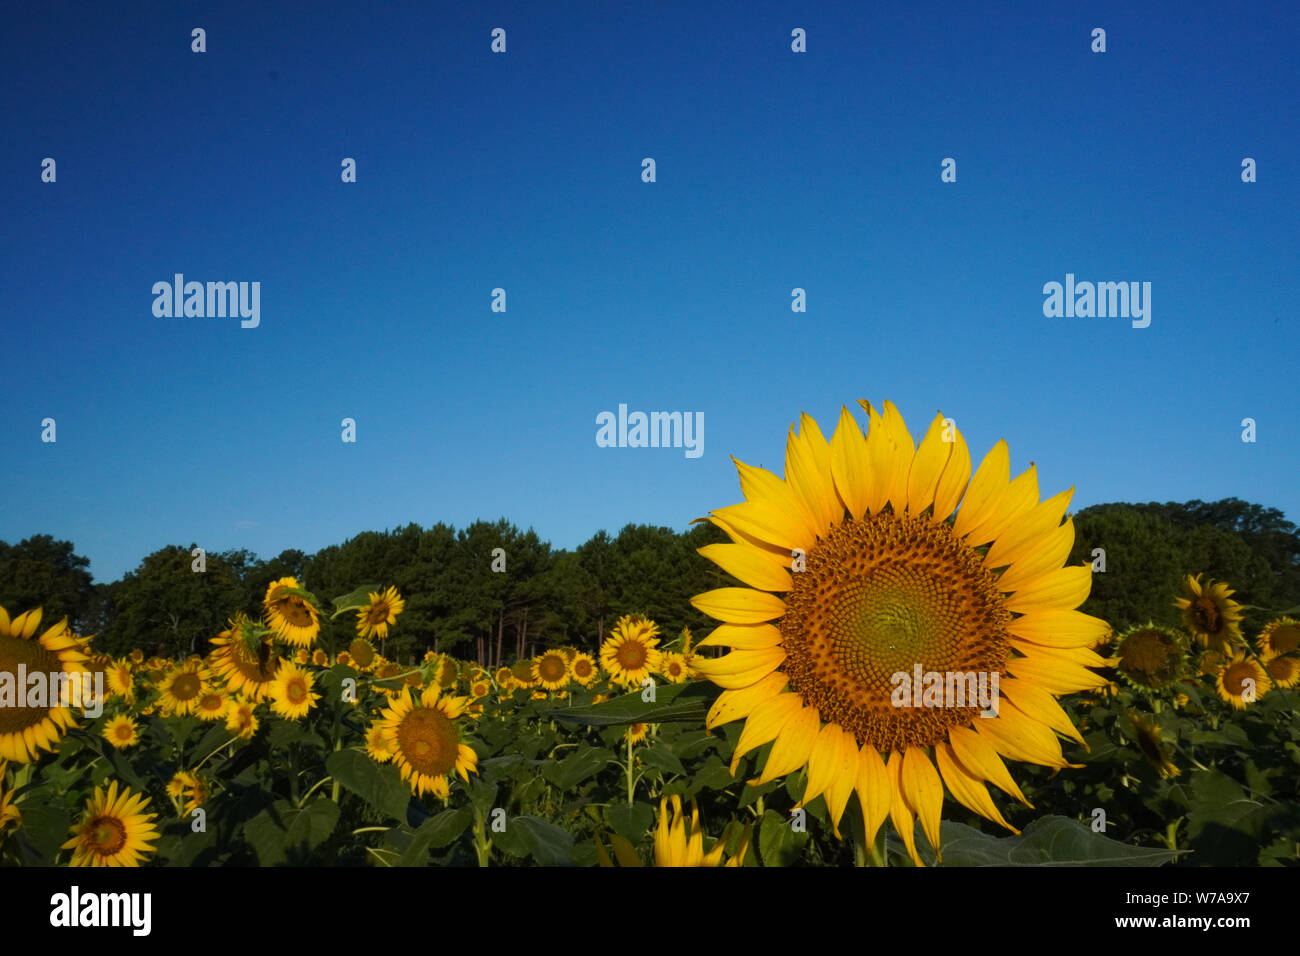 A sunflower faces the sun with a field of sunflowers behind it Stock Photo